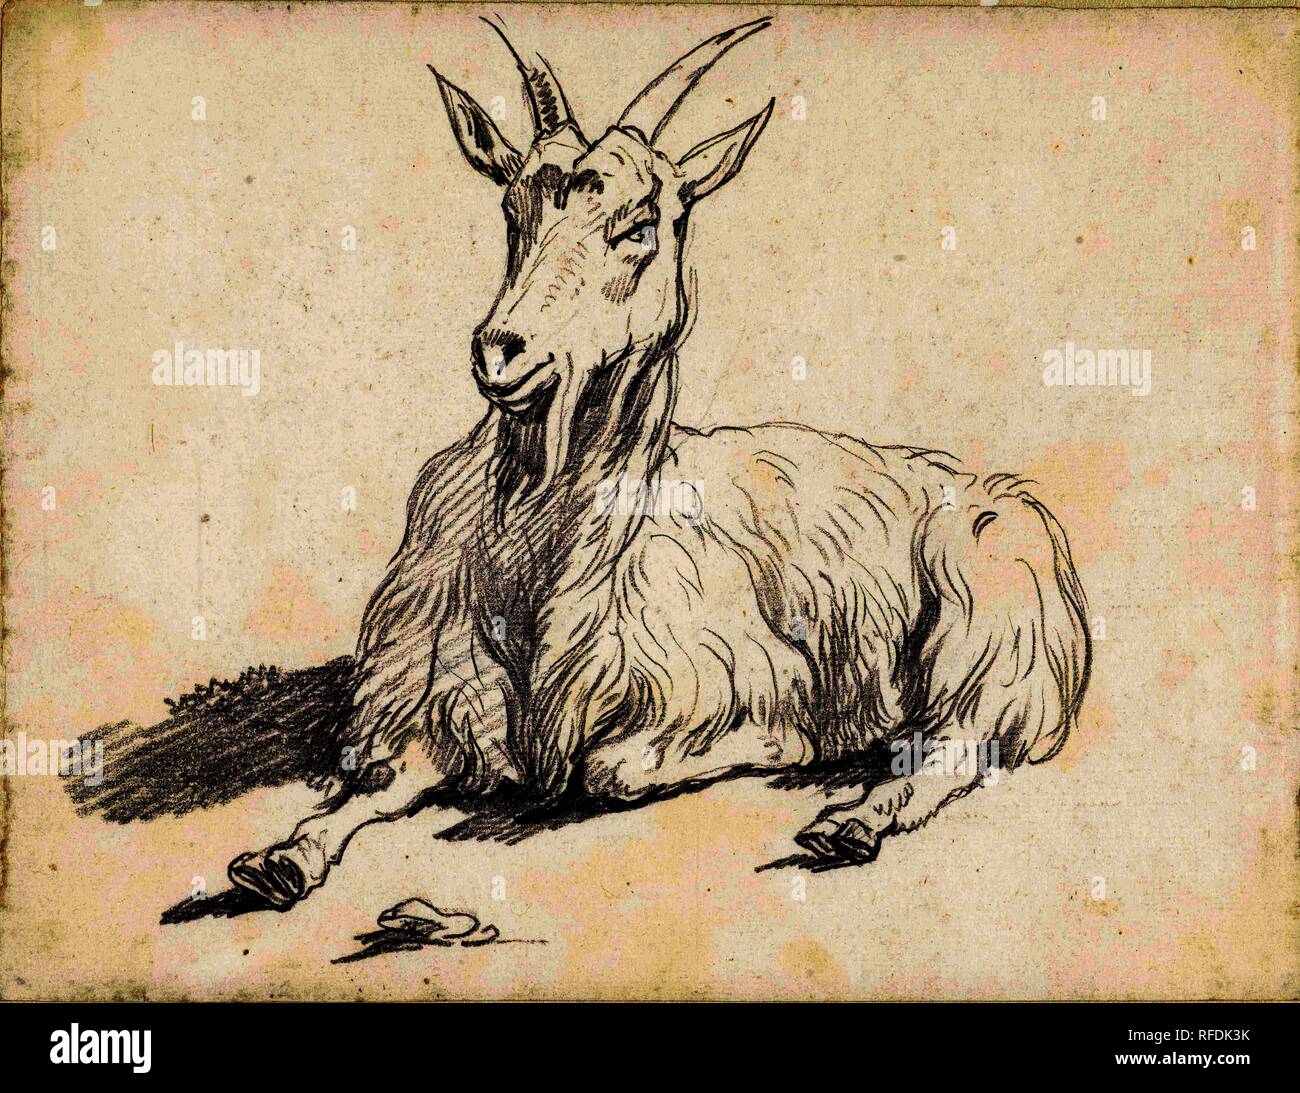 223 Mm High Resolution Stock Photography and Images - Alamy